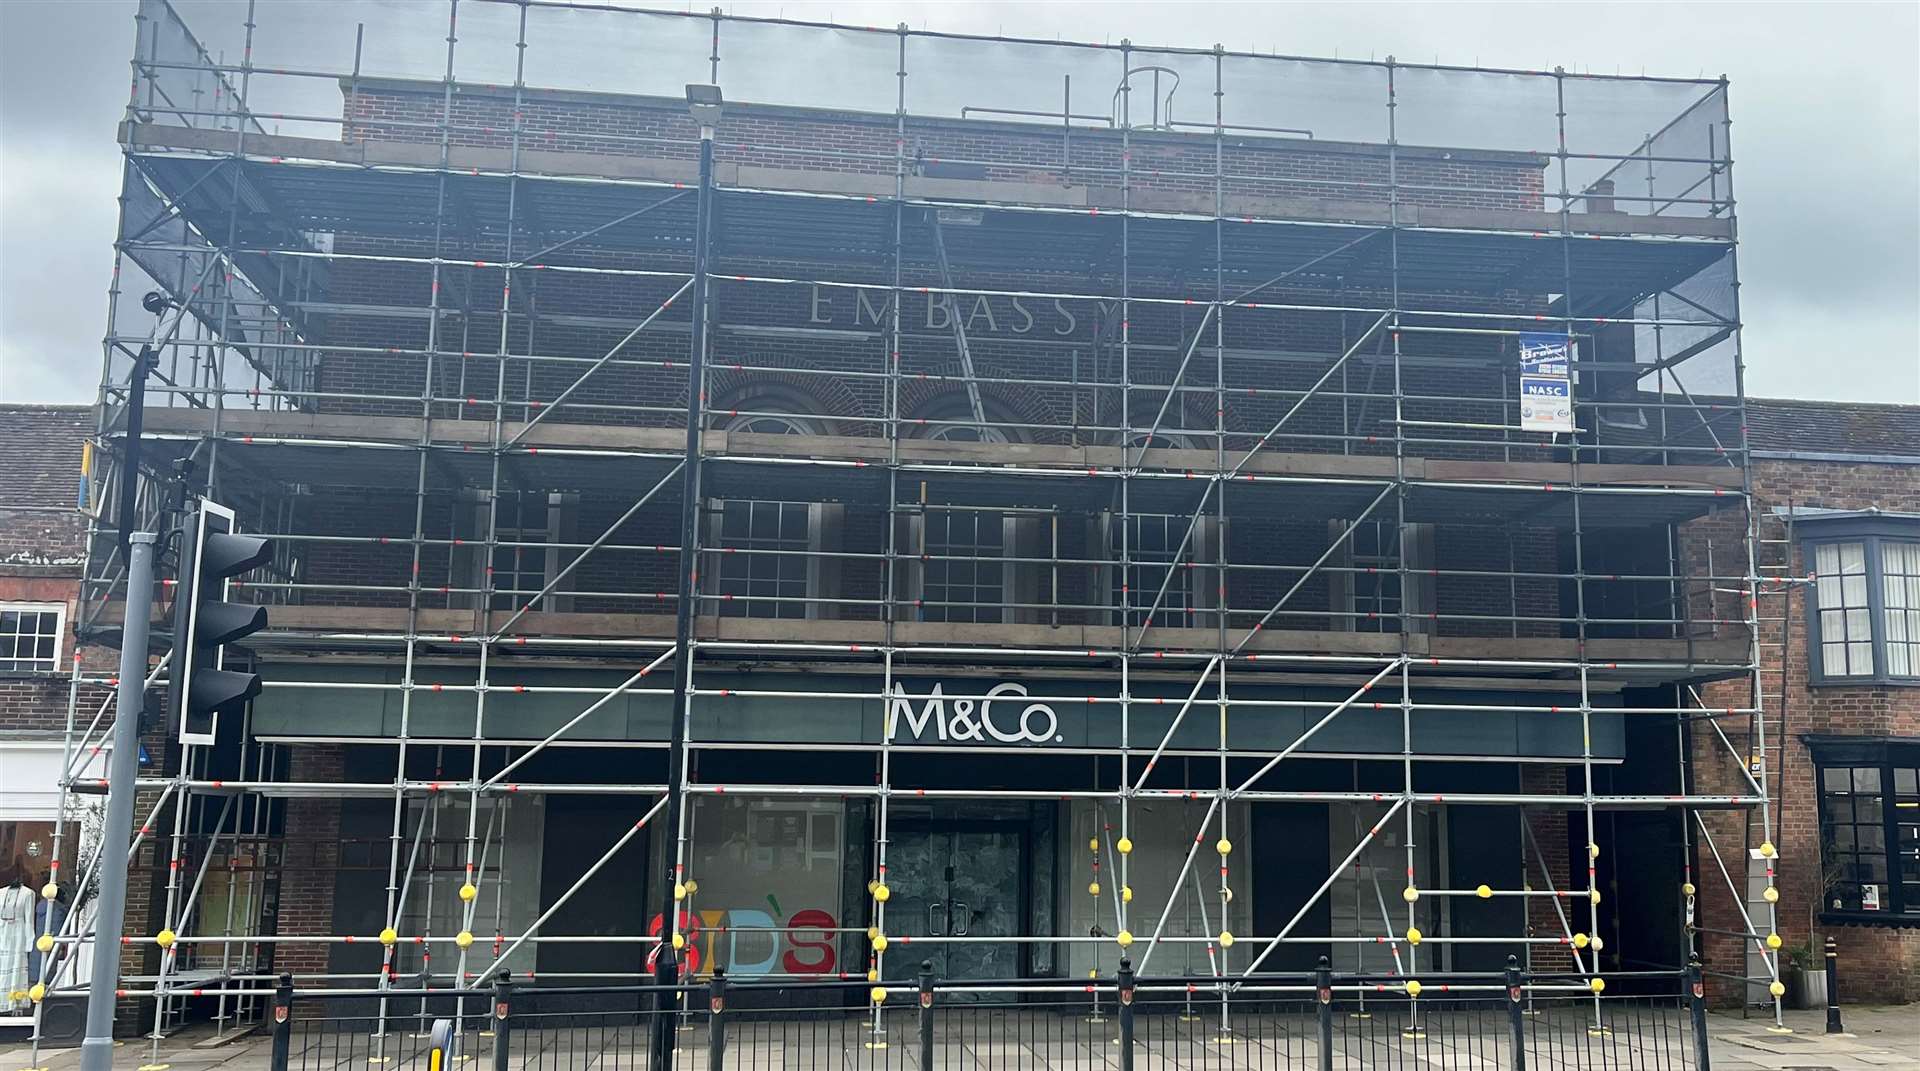 Scaffolding has already been put up on the Embassy Building in Tenterden, which M&Co left last year